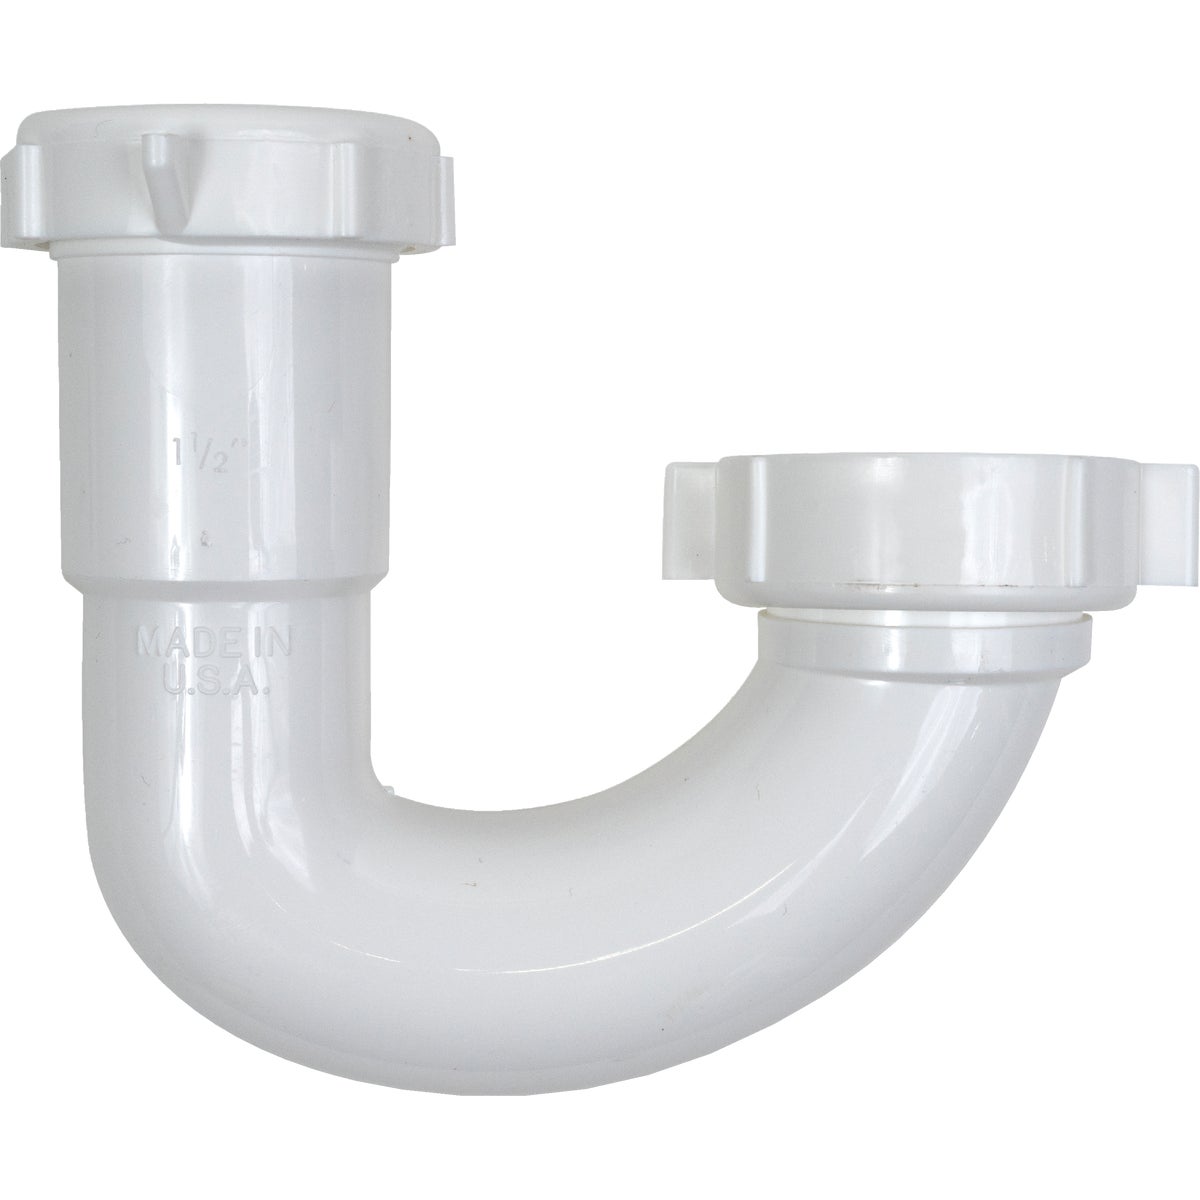 Item 444650, The J bend has an outlet of 1-1/2" and an inlet of 1-1/2" or 1-1/4" It can 